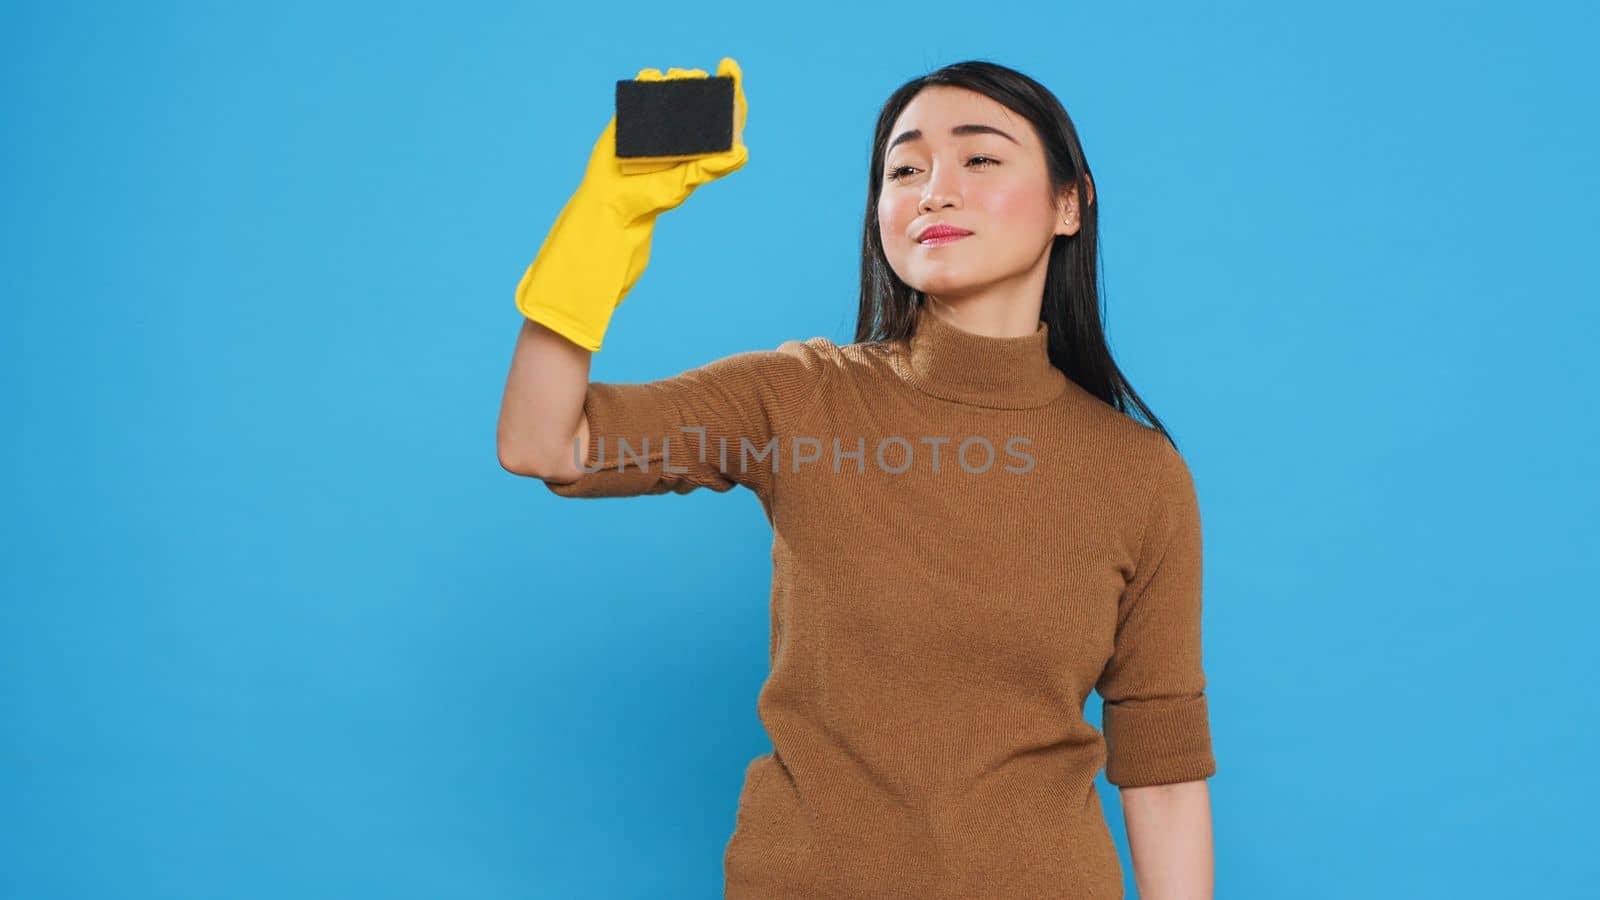 Smiling maid using sponge and professional cleaning detergent while cleaning customer house, using cleanliness equipment. Cleaner wore gloves as part of her attire while doing the housework.